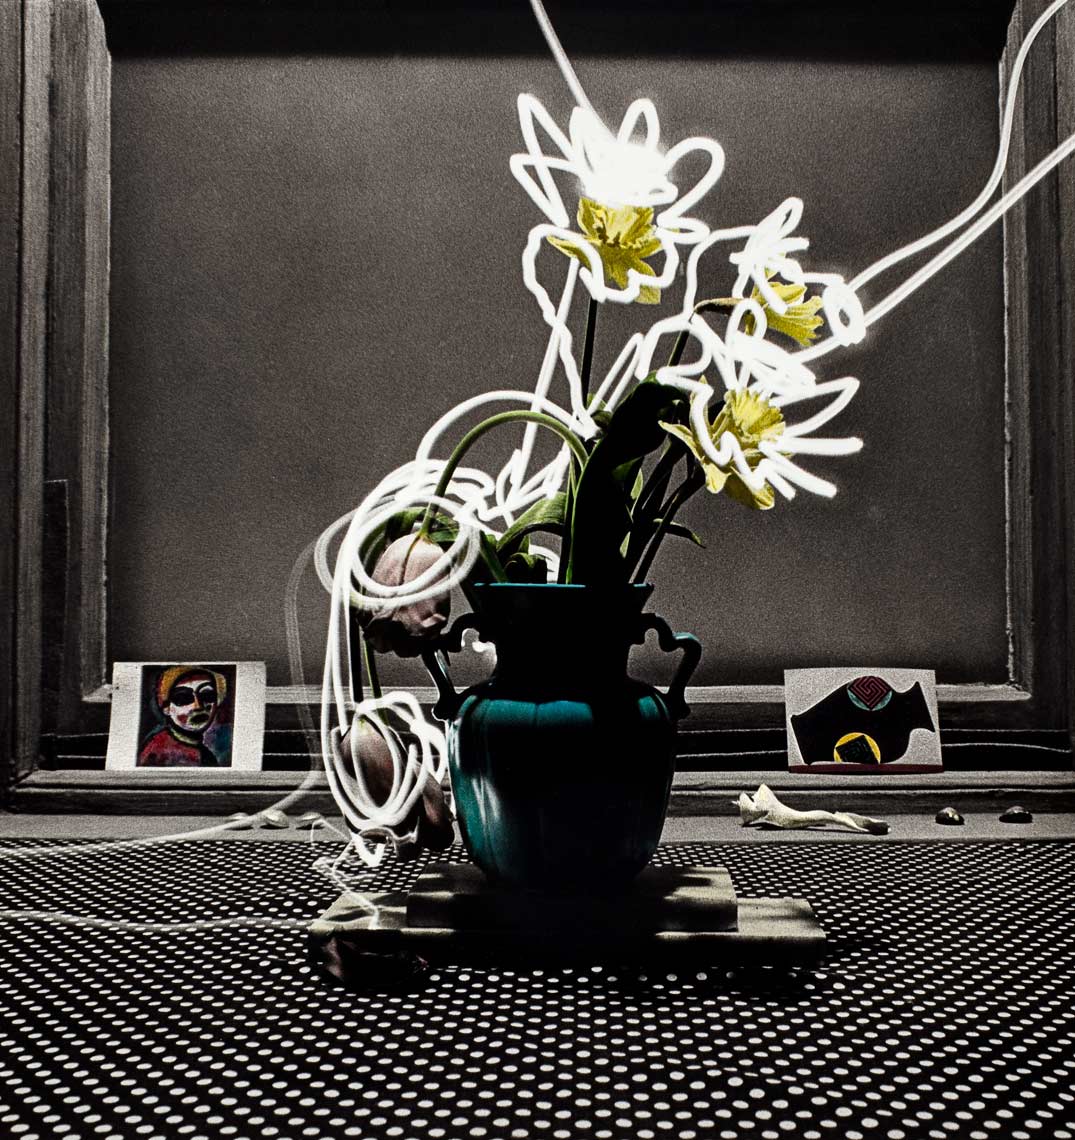 David Lebe; Tulips and Daffodils with Two Post Cards, 1982, still life, light drawing, hand colored photograph